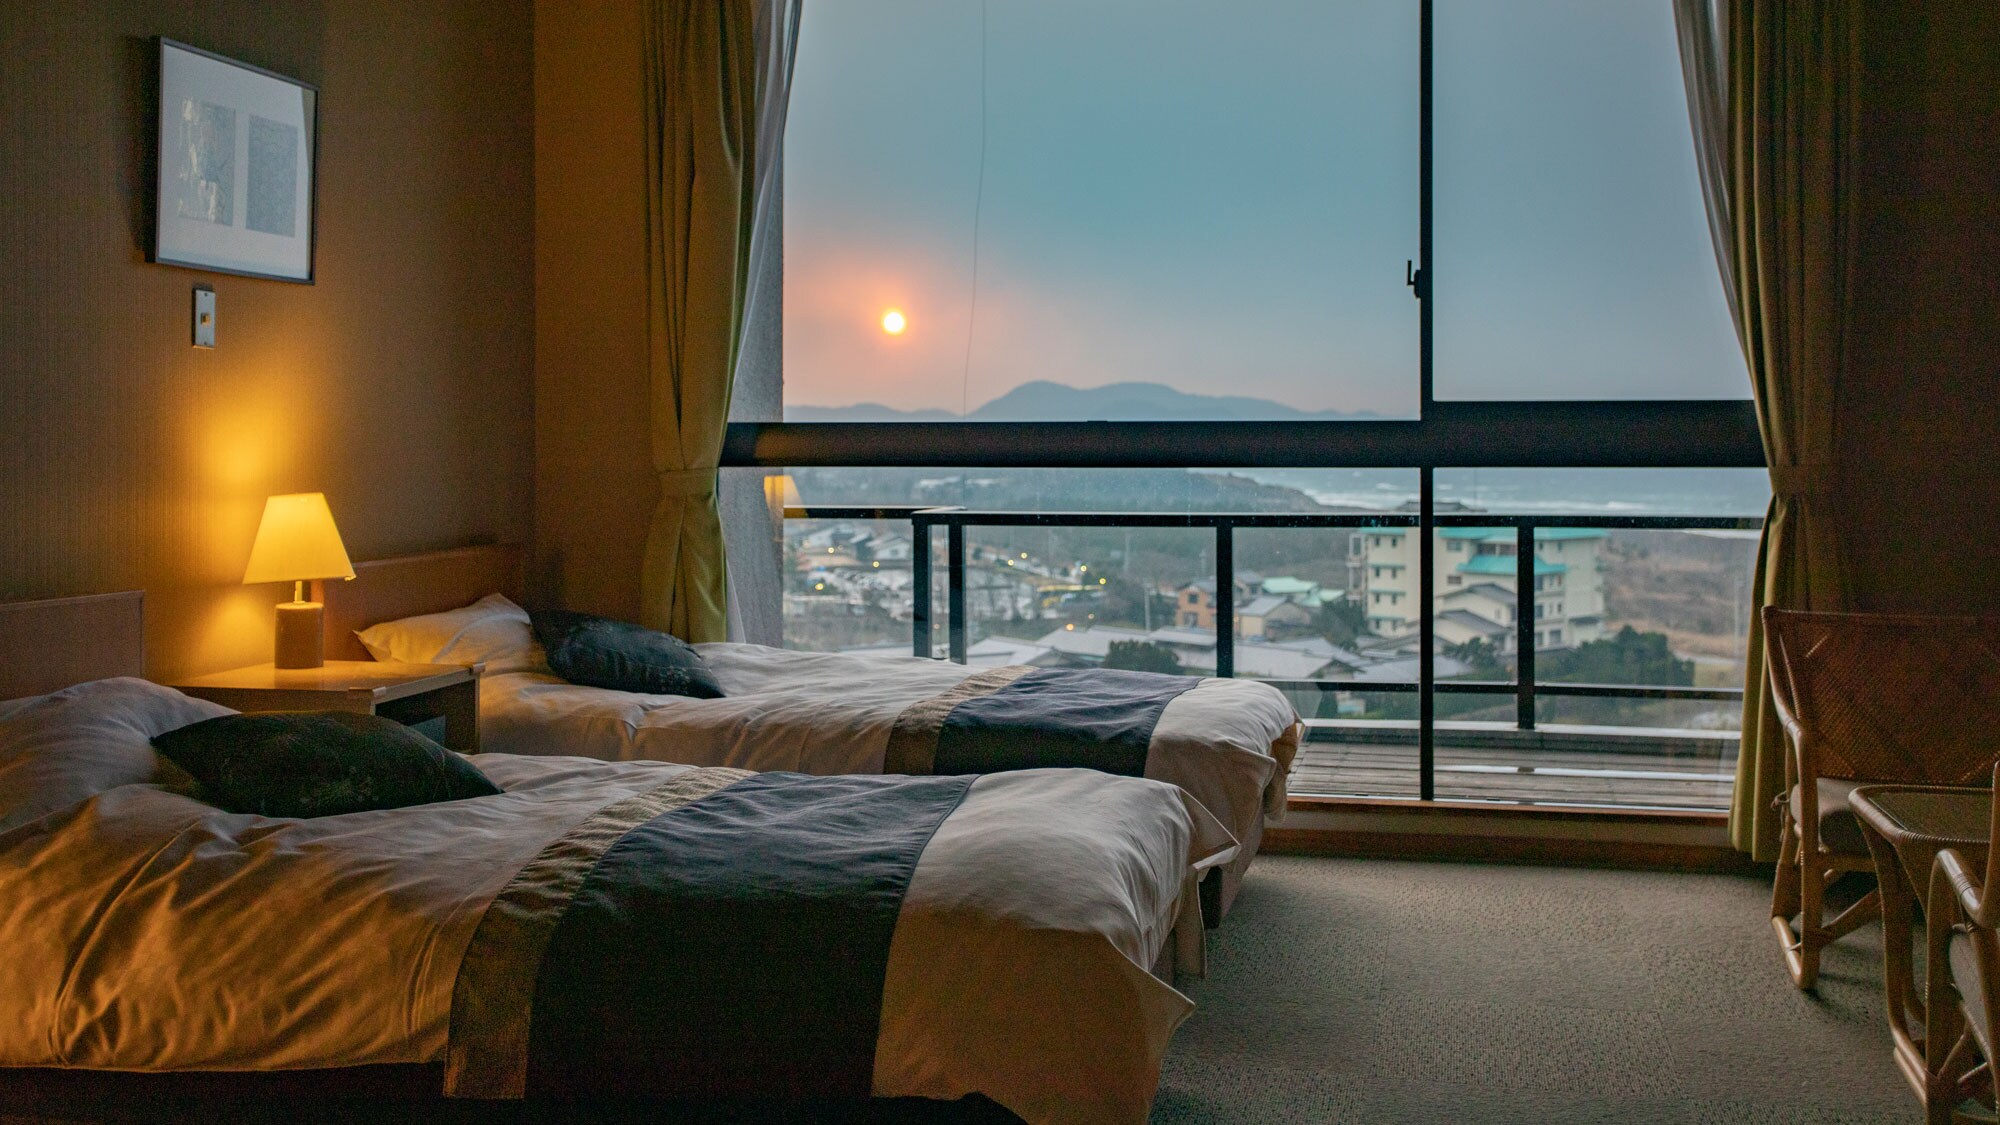 Faintly lit lamps and the setting sun. All guest rooms at Kashoen have a panoramic view of the sea.